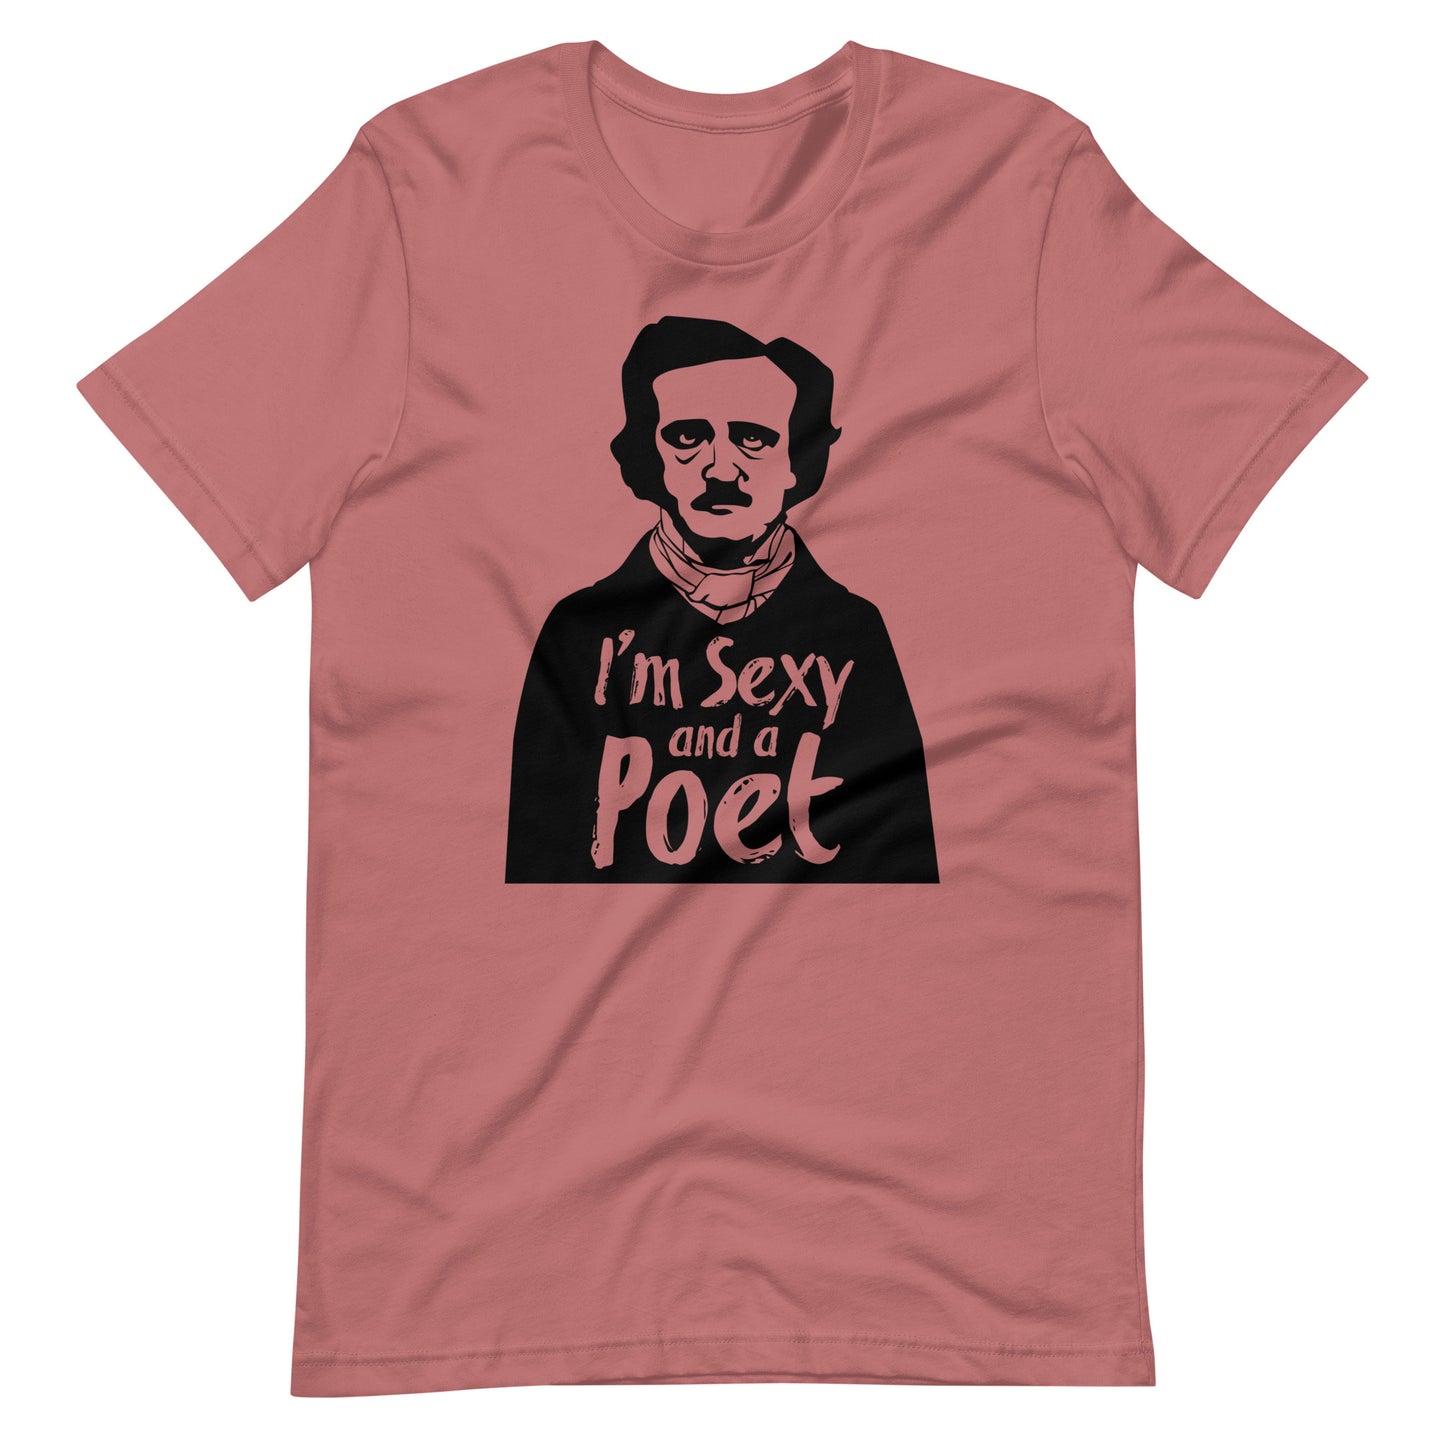 Women's Edgar Allan Poe "I'm Sexy and a Poet" t-shirt - Mauve Front